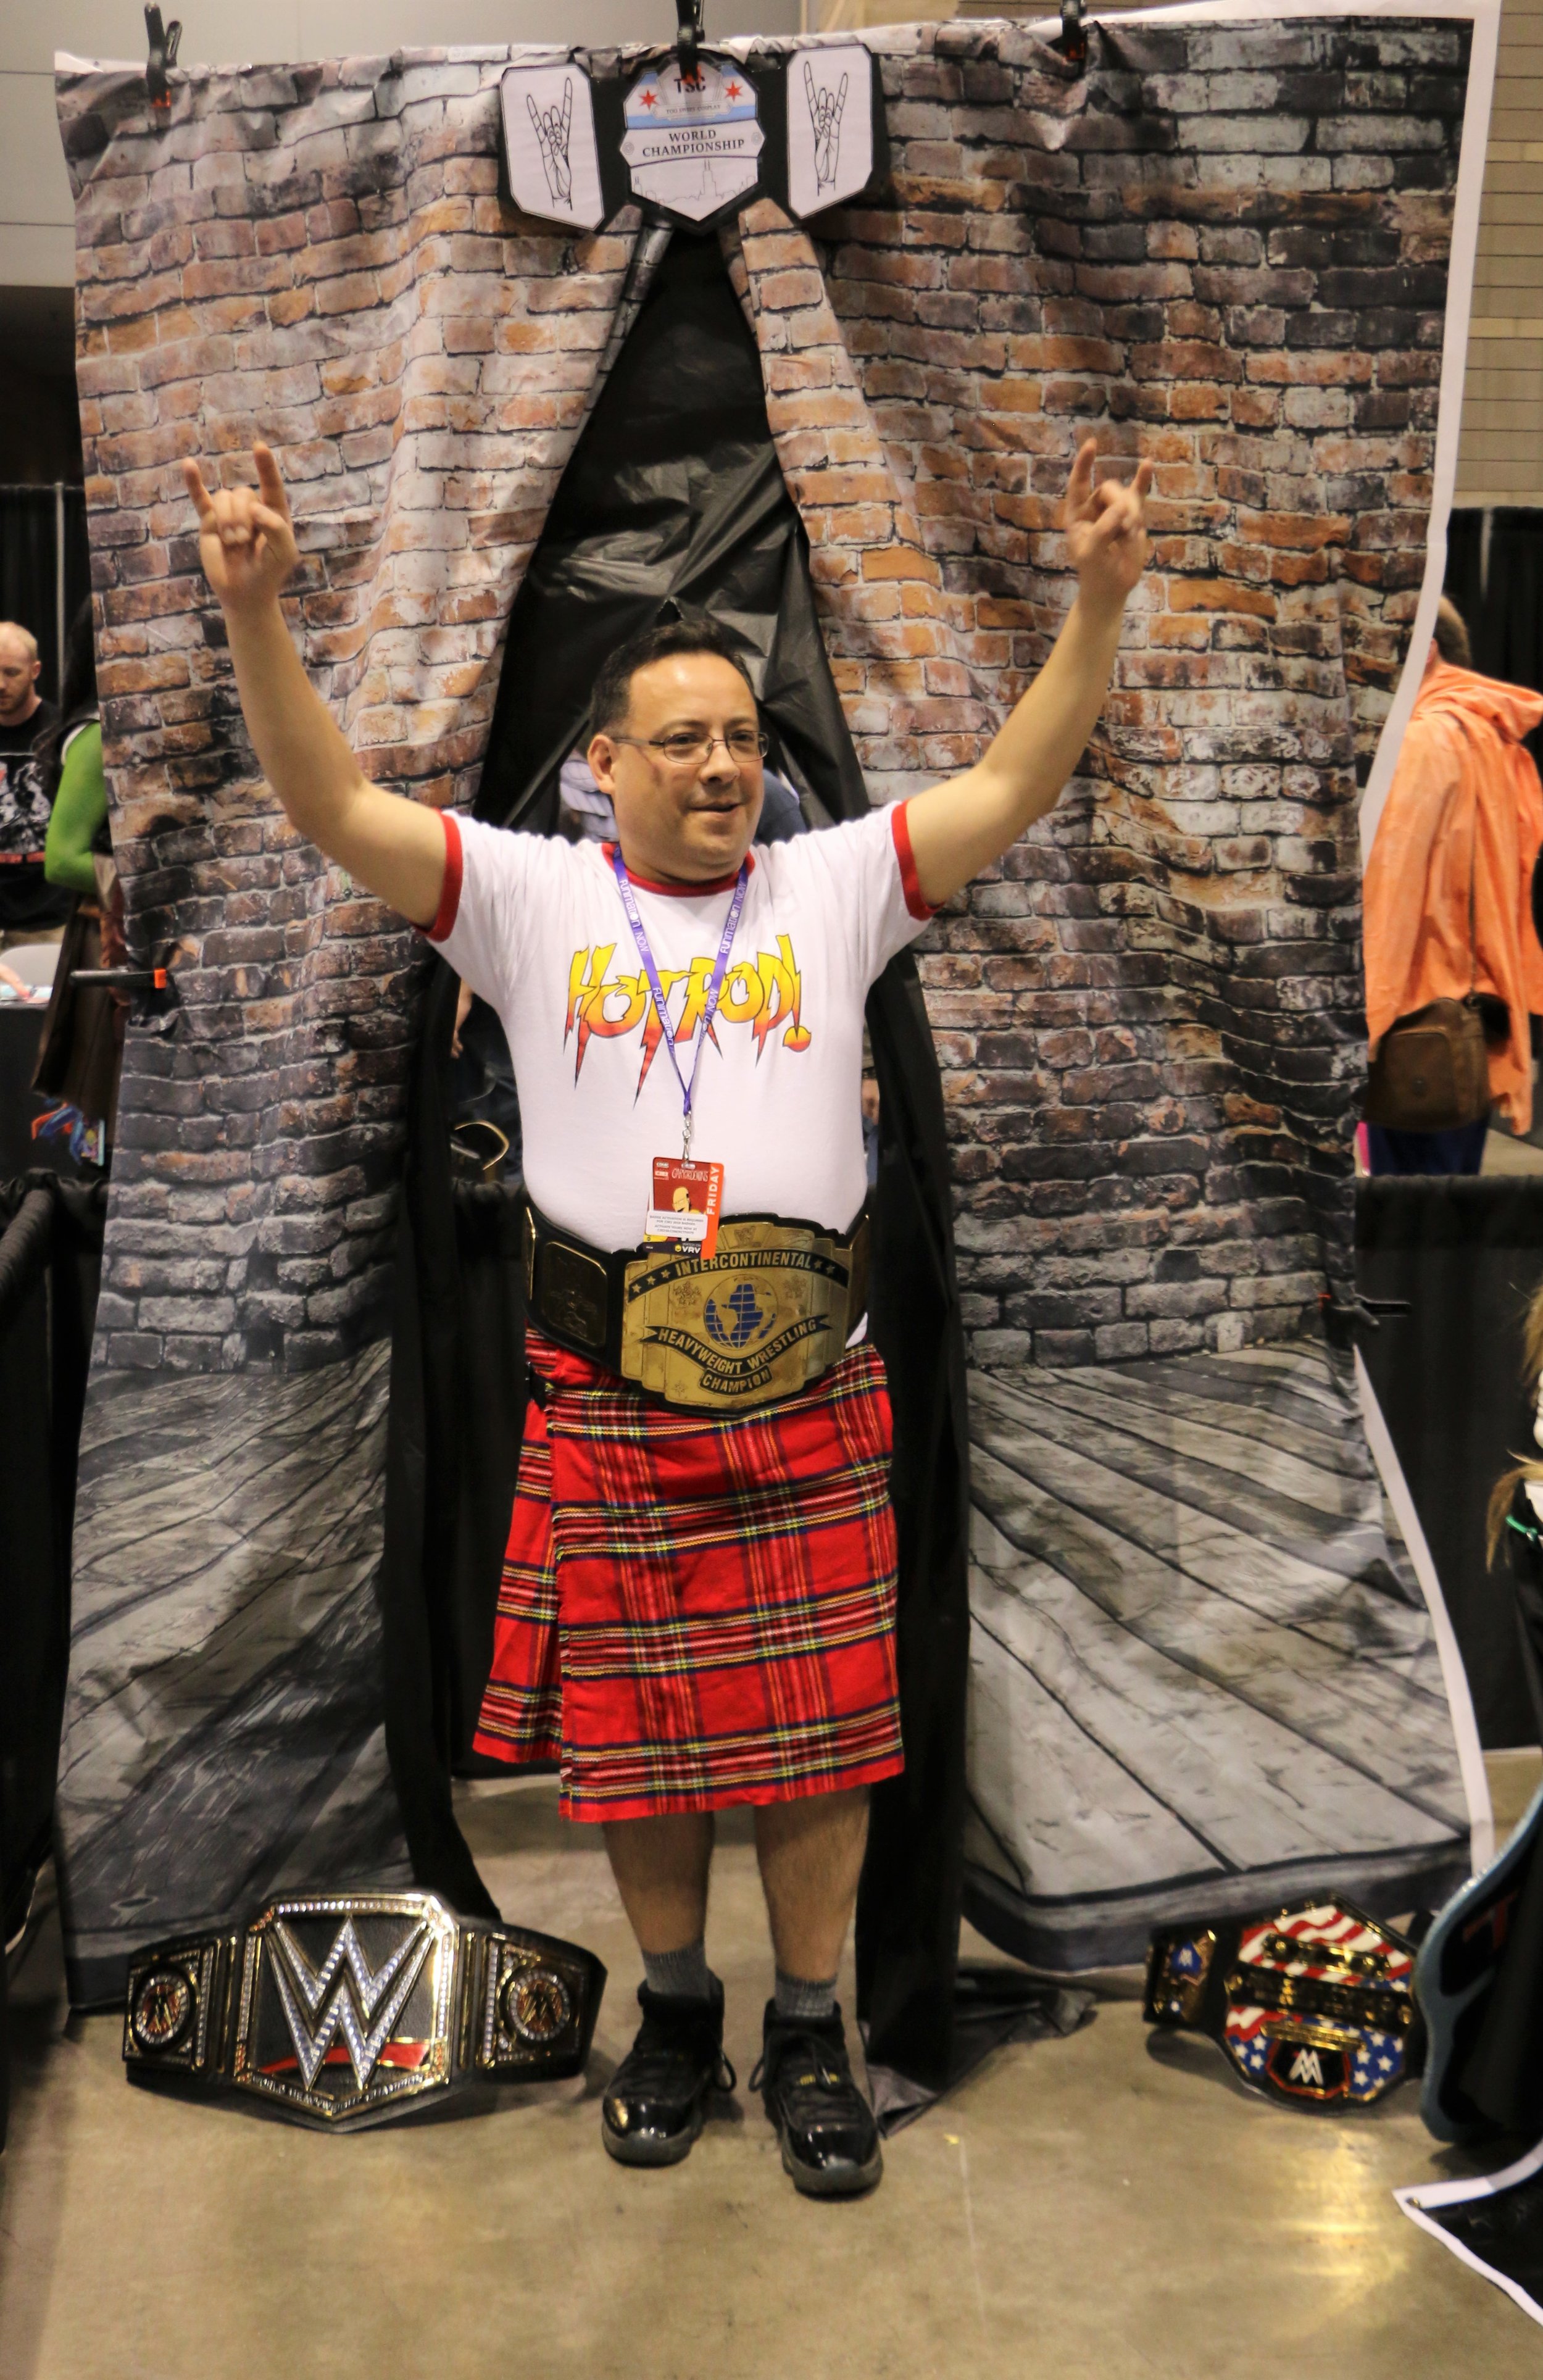  Rowdy Roddy Piper cosplayer at the Too Sweet Cosplay booth.  